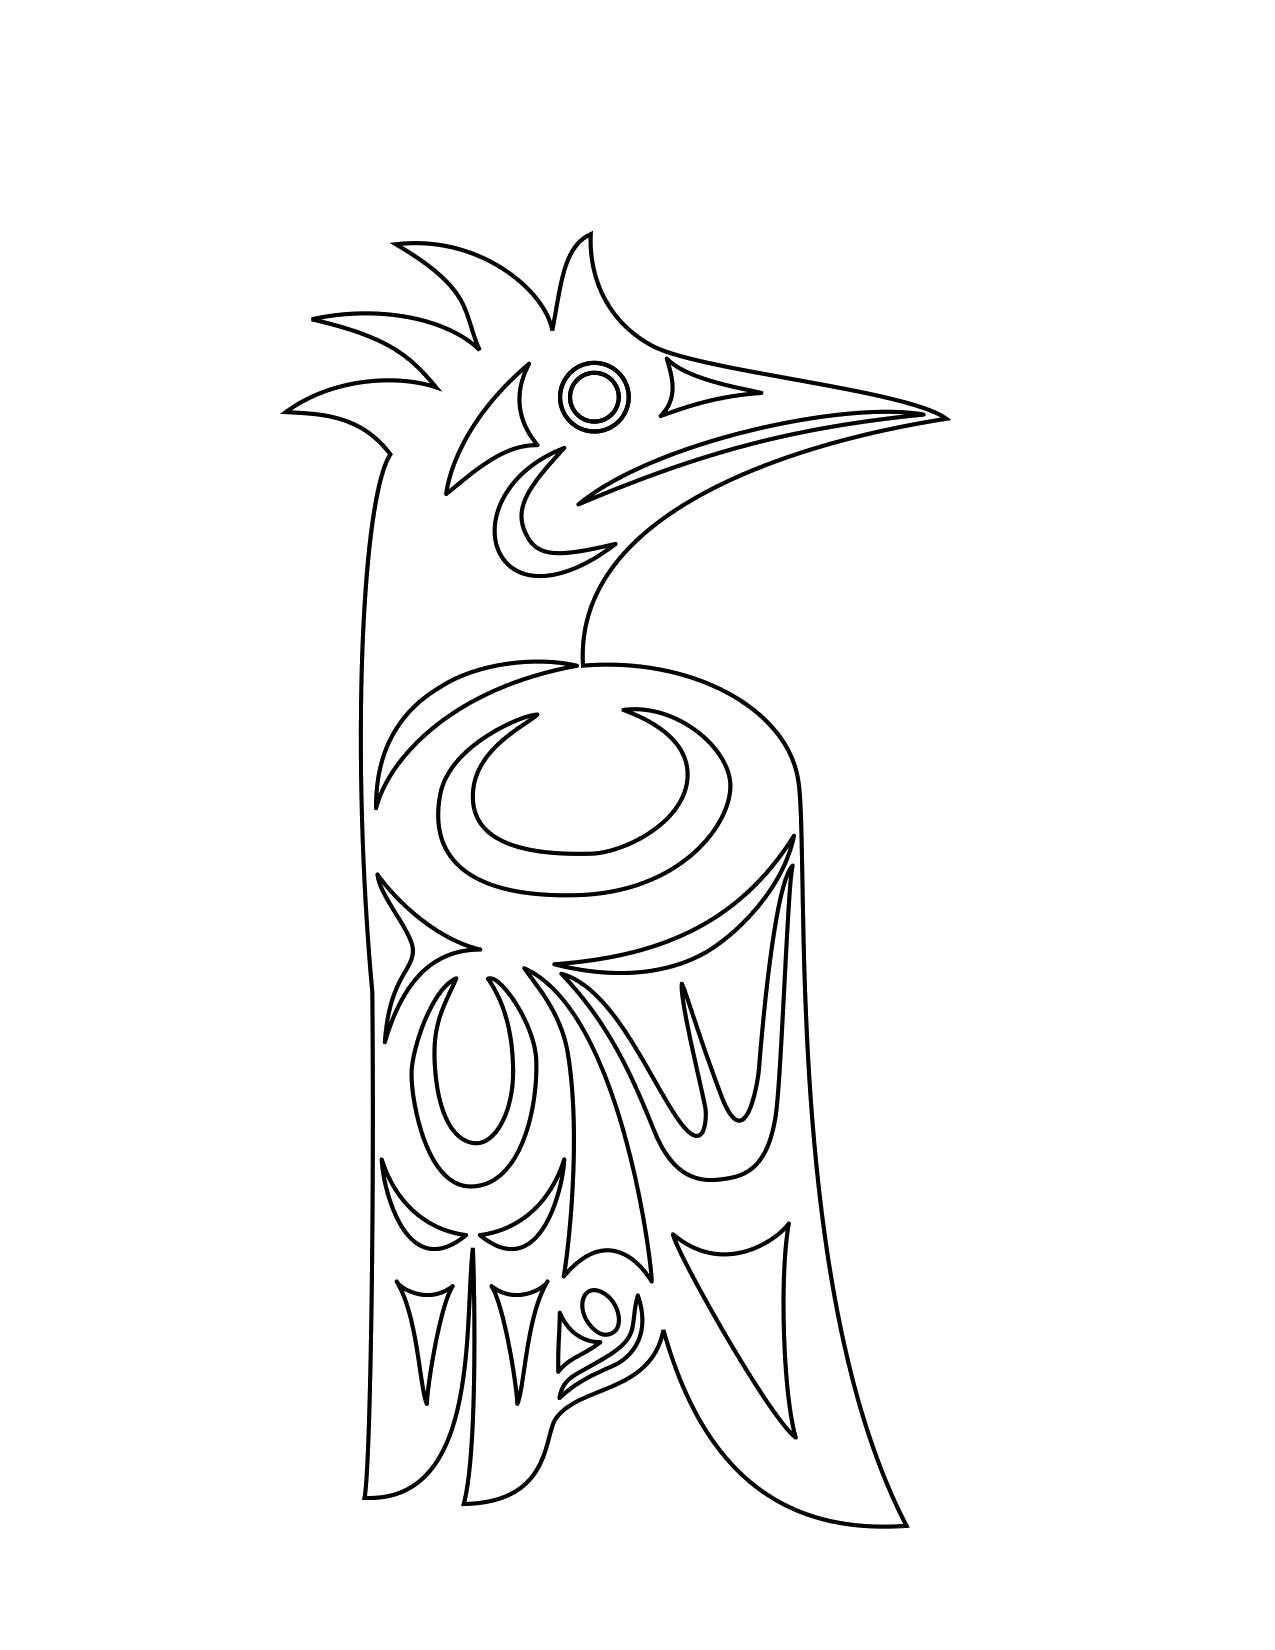 Coloring Hoopoe. Category The contours for cutting out the birds. Tags:  hoopoe.